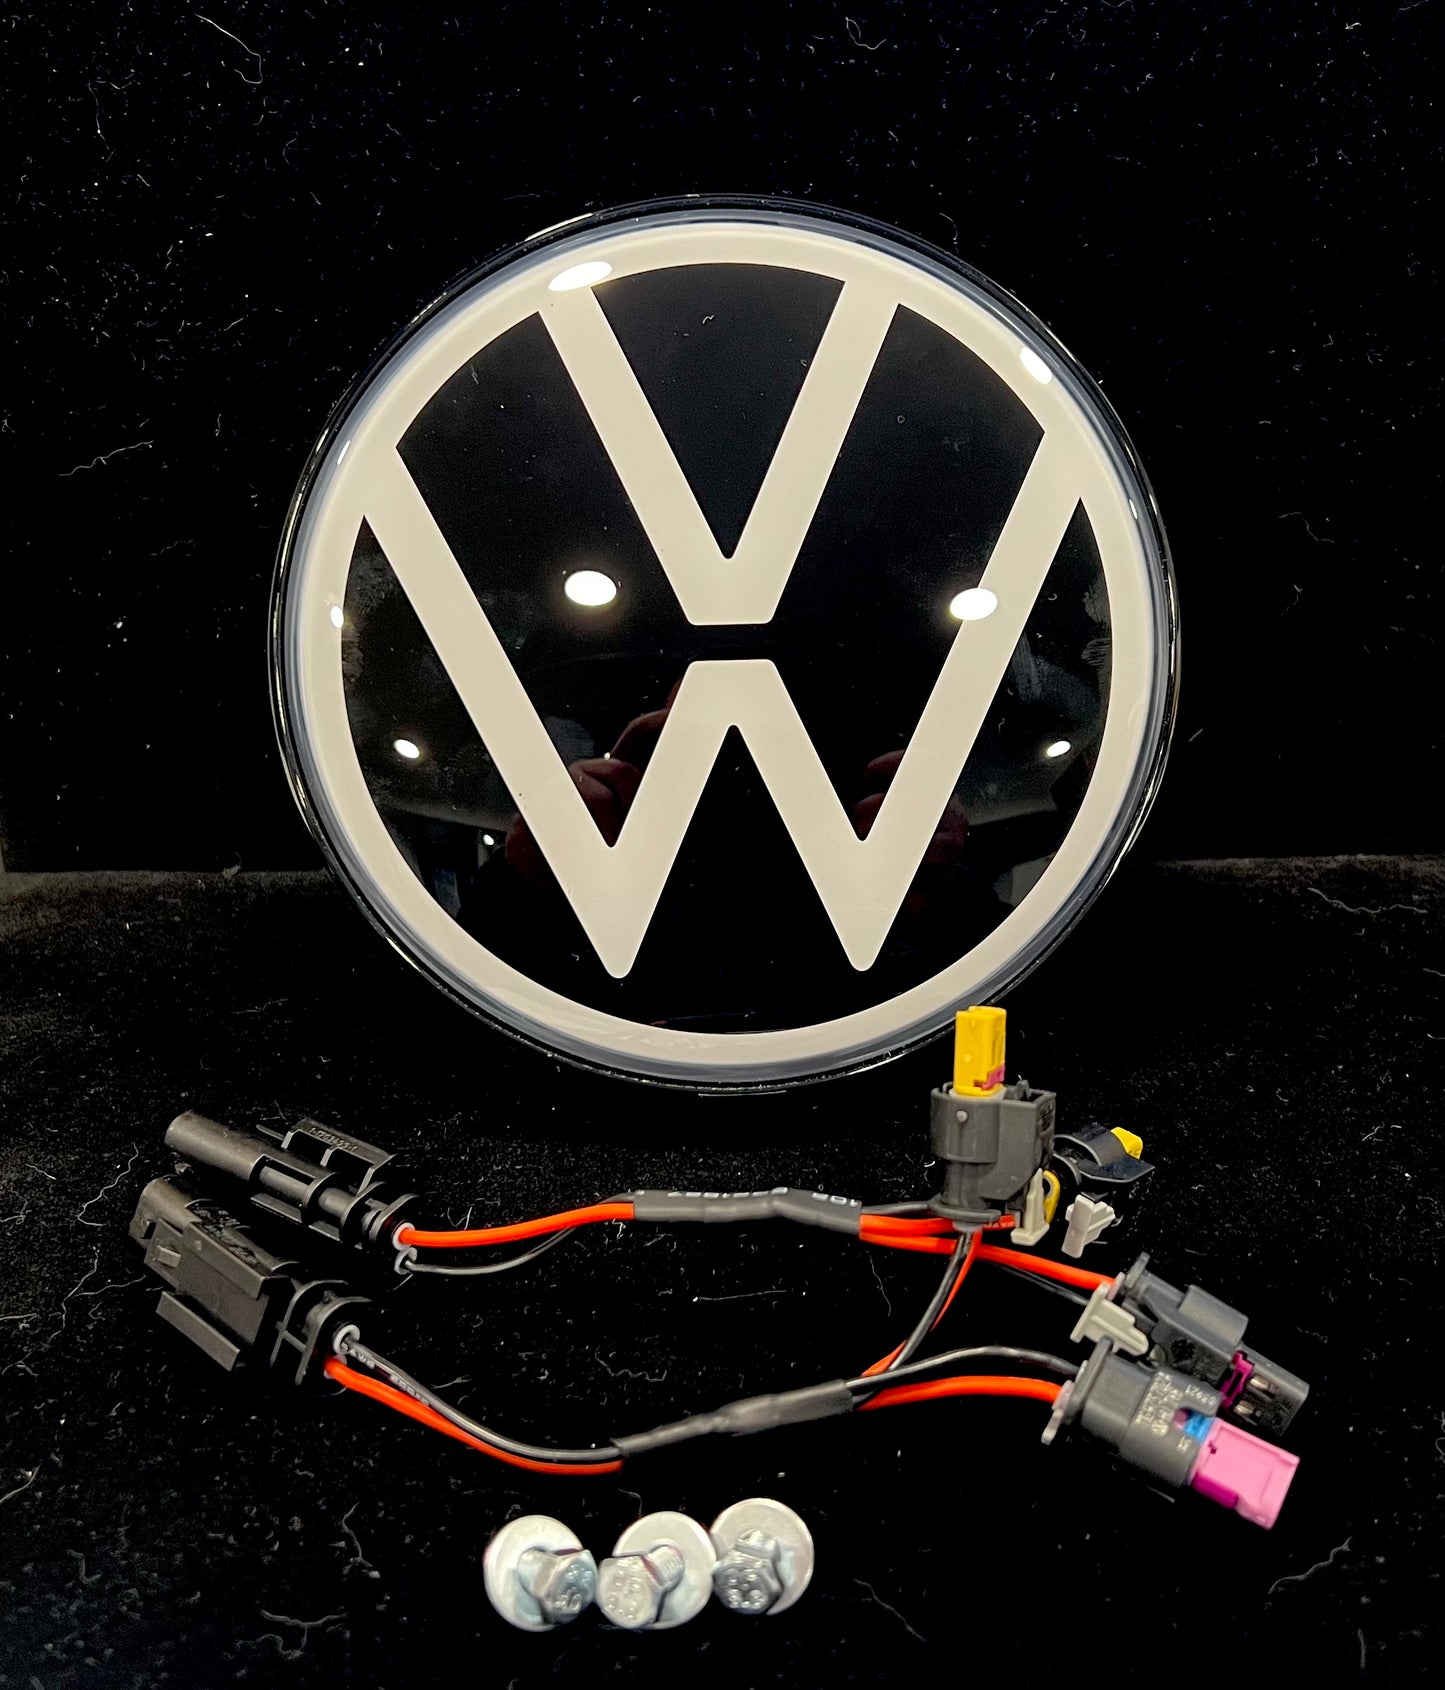 LED badge kit for VW ID.4 compatible with cars equipped with front LED bars